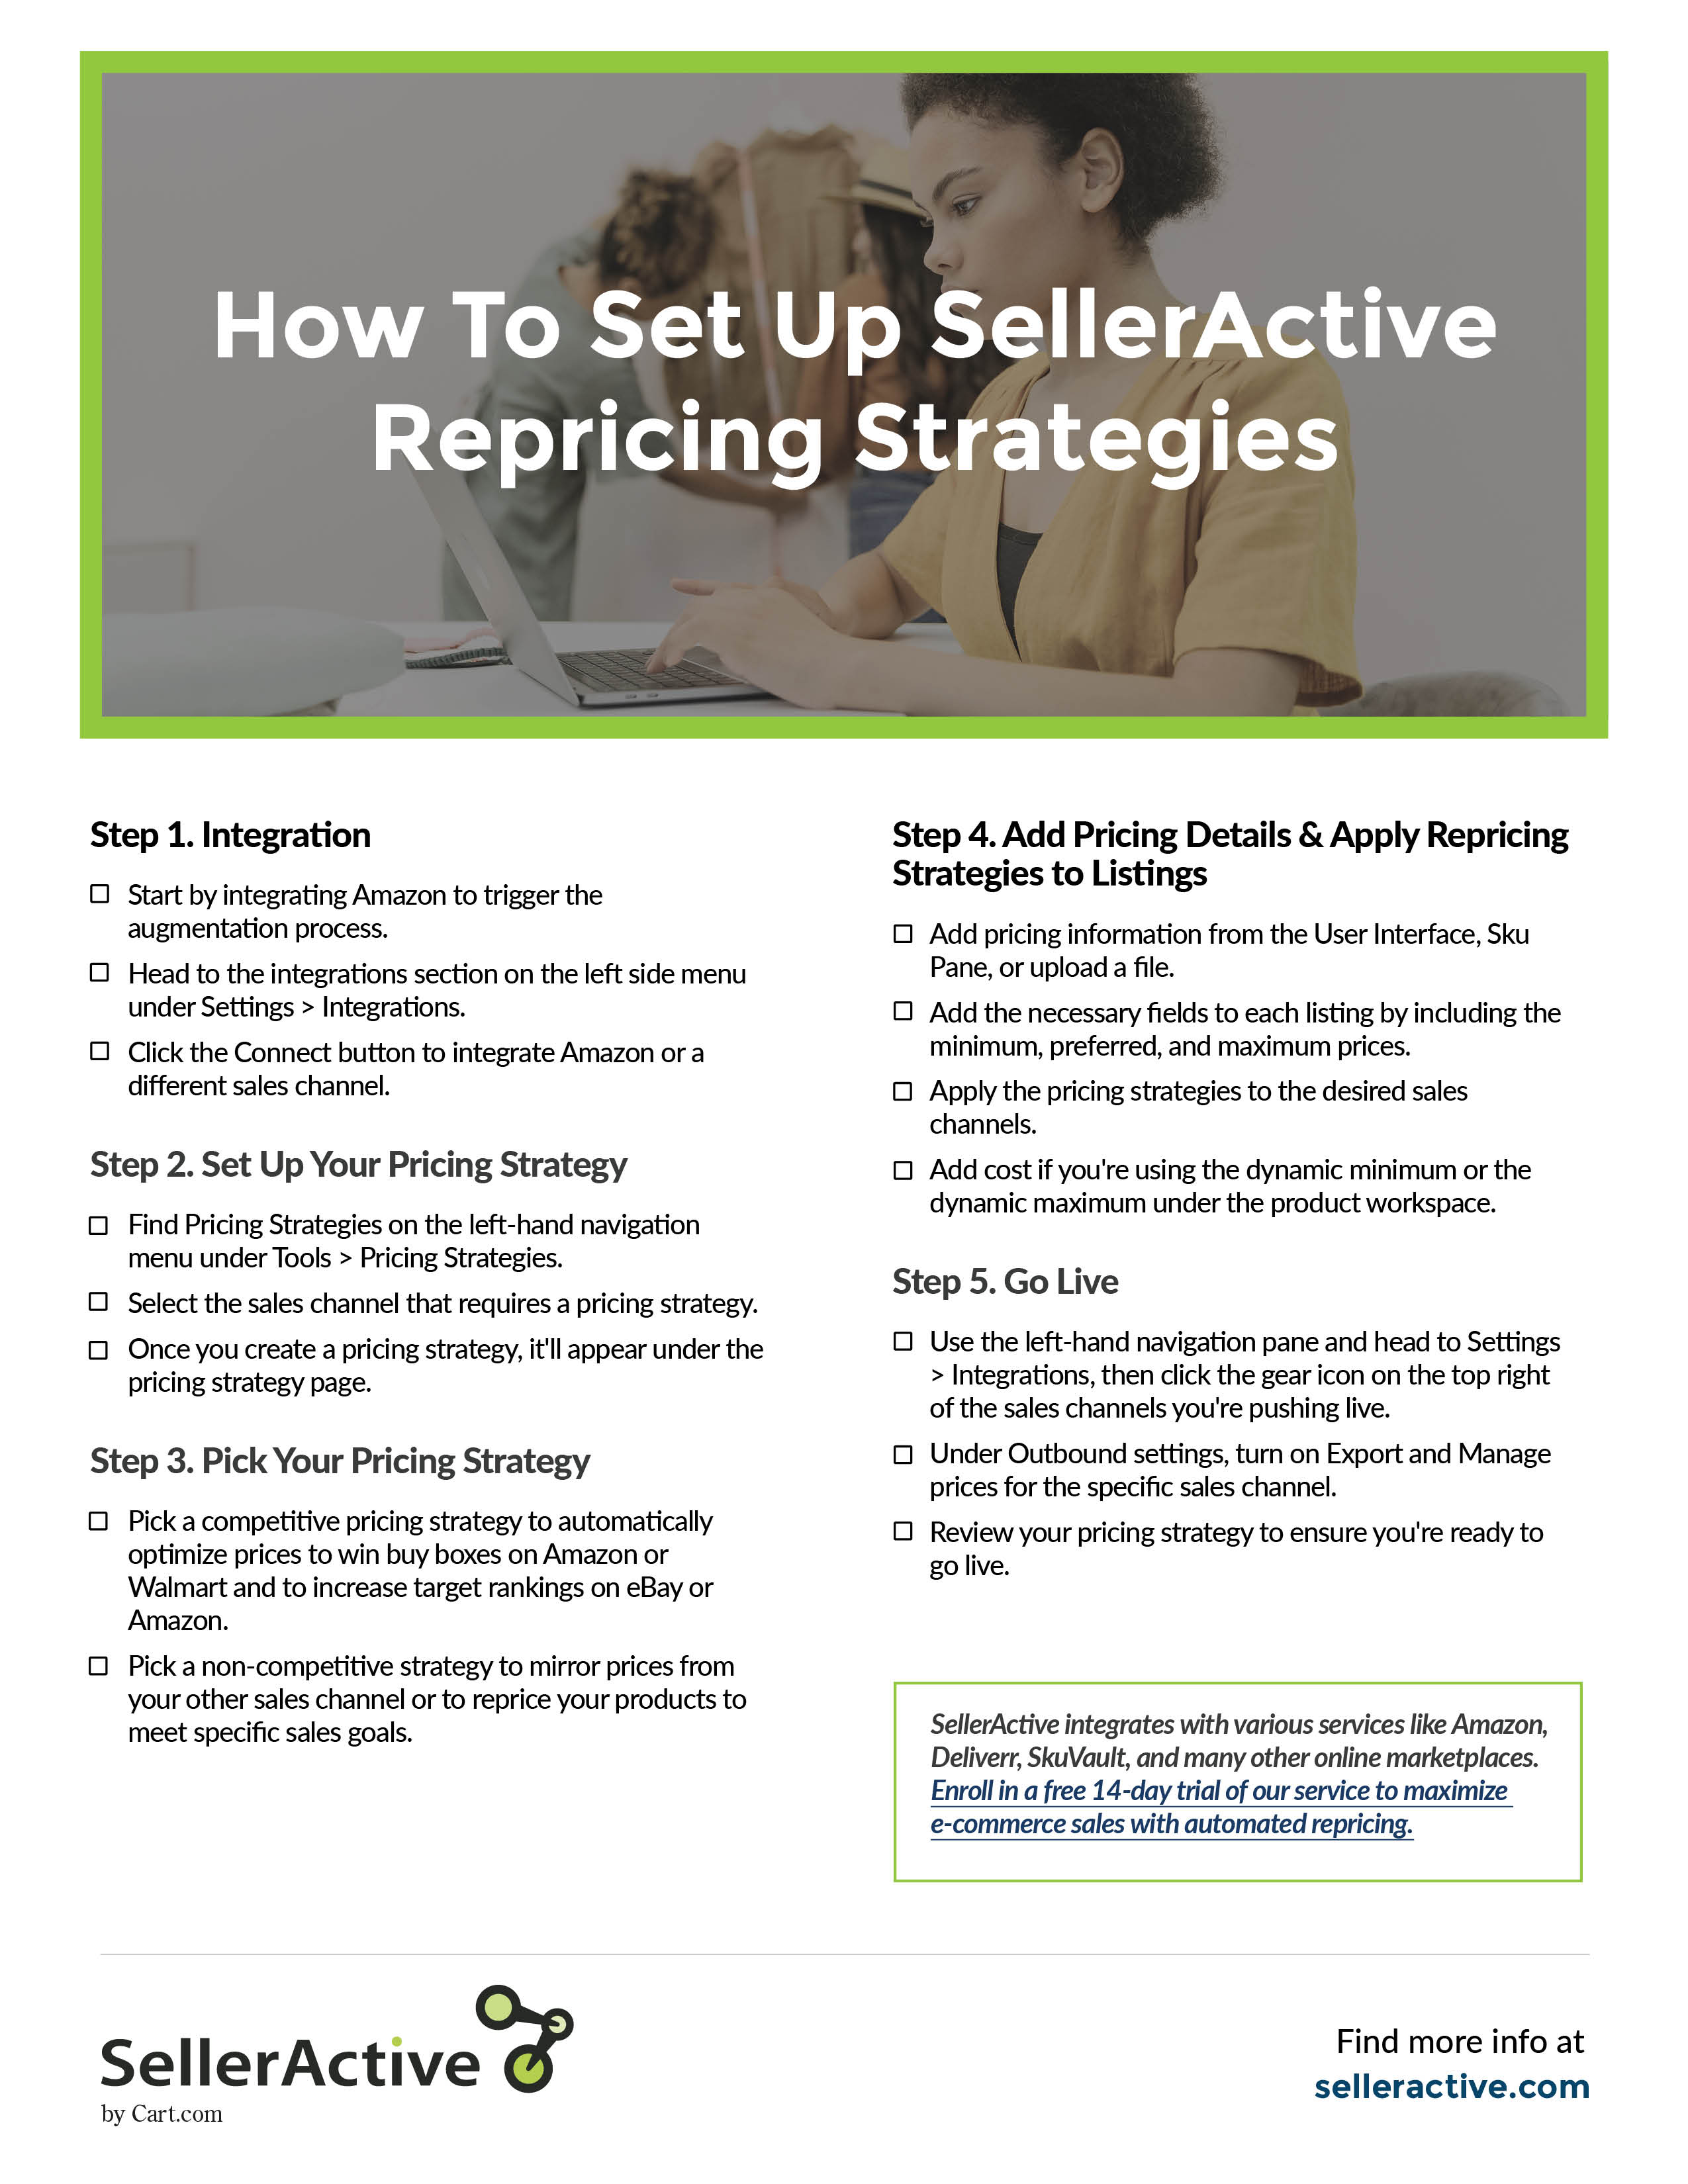 How-To-set-up-selleractive-repricing-strategies